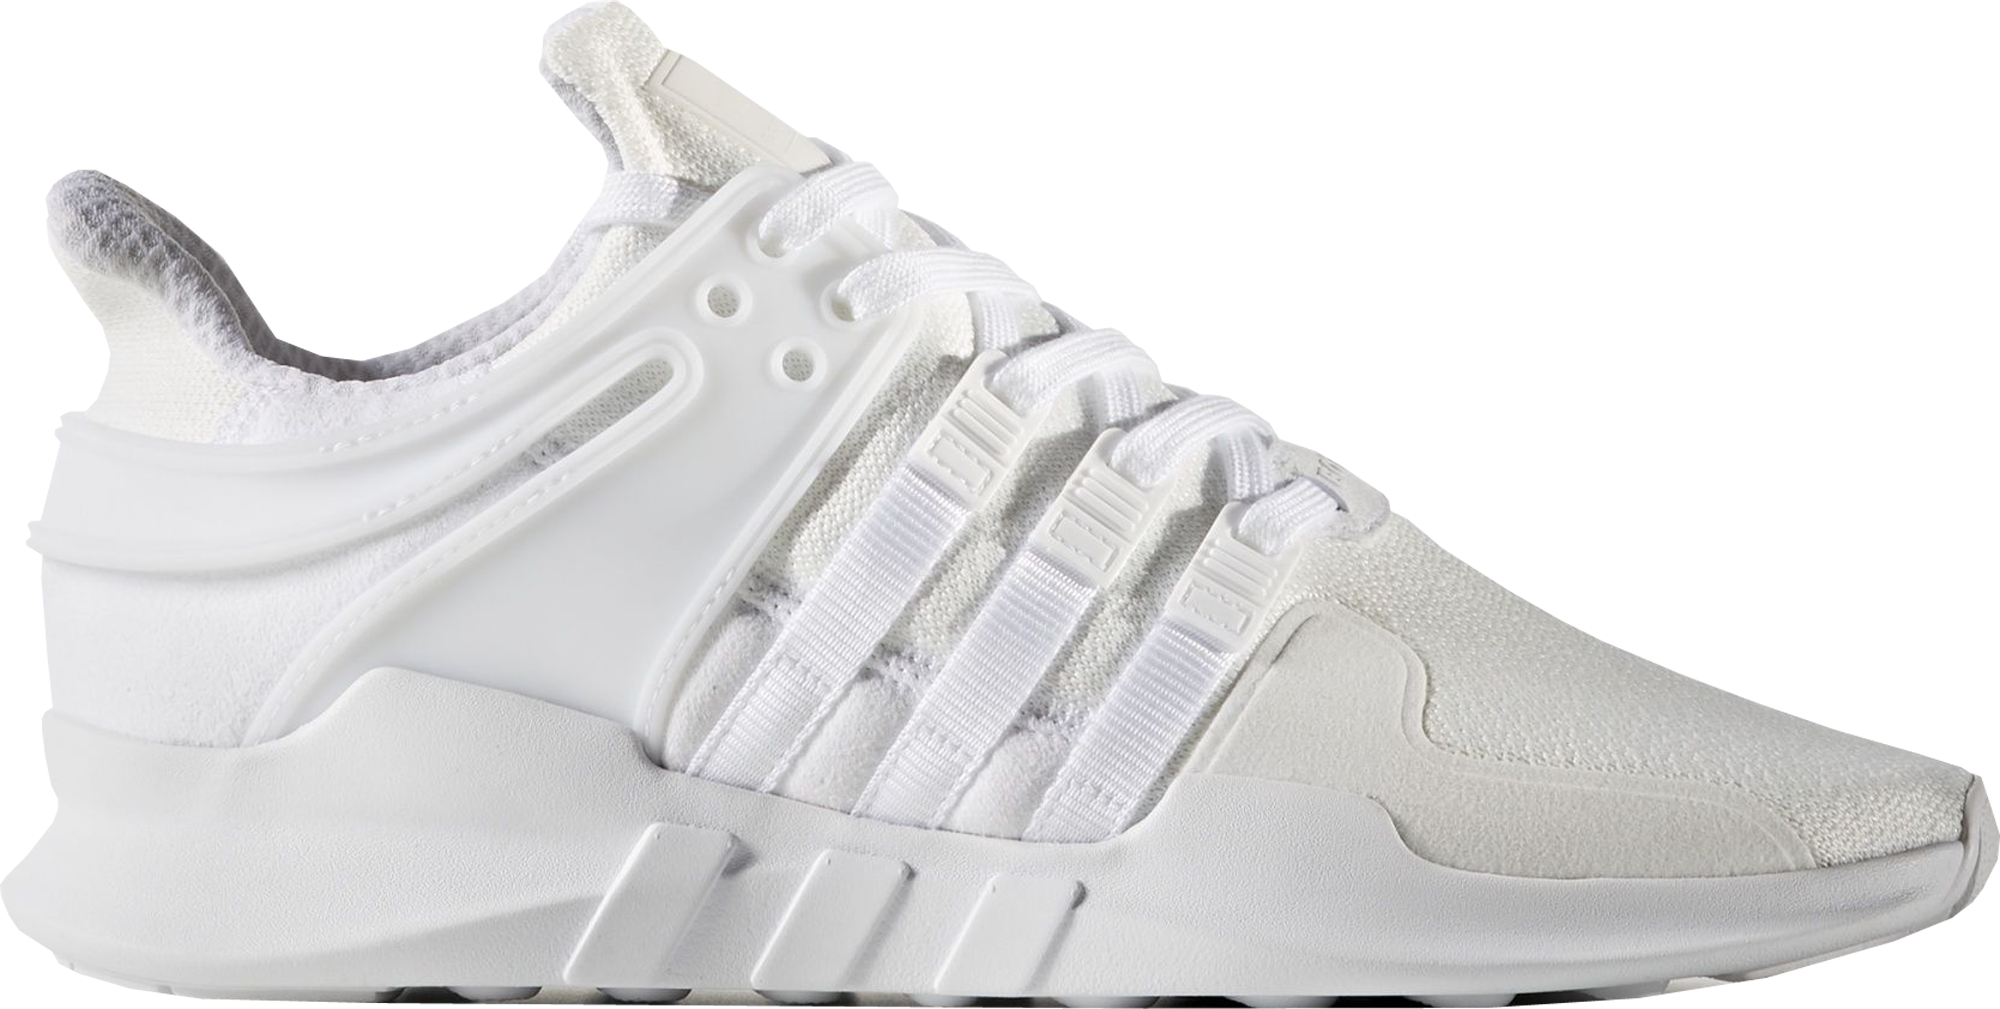 adidas eqt white and grey